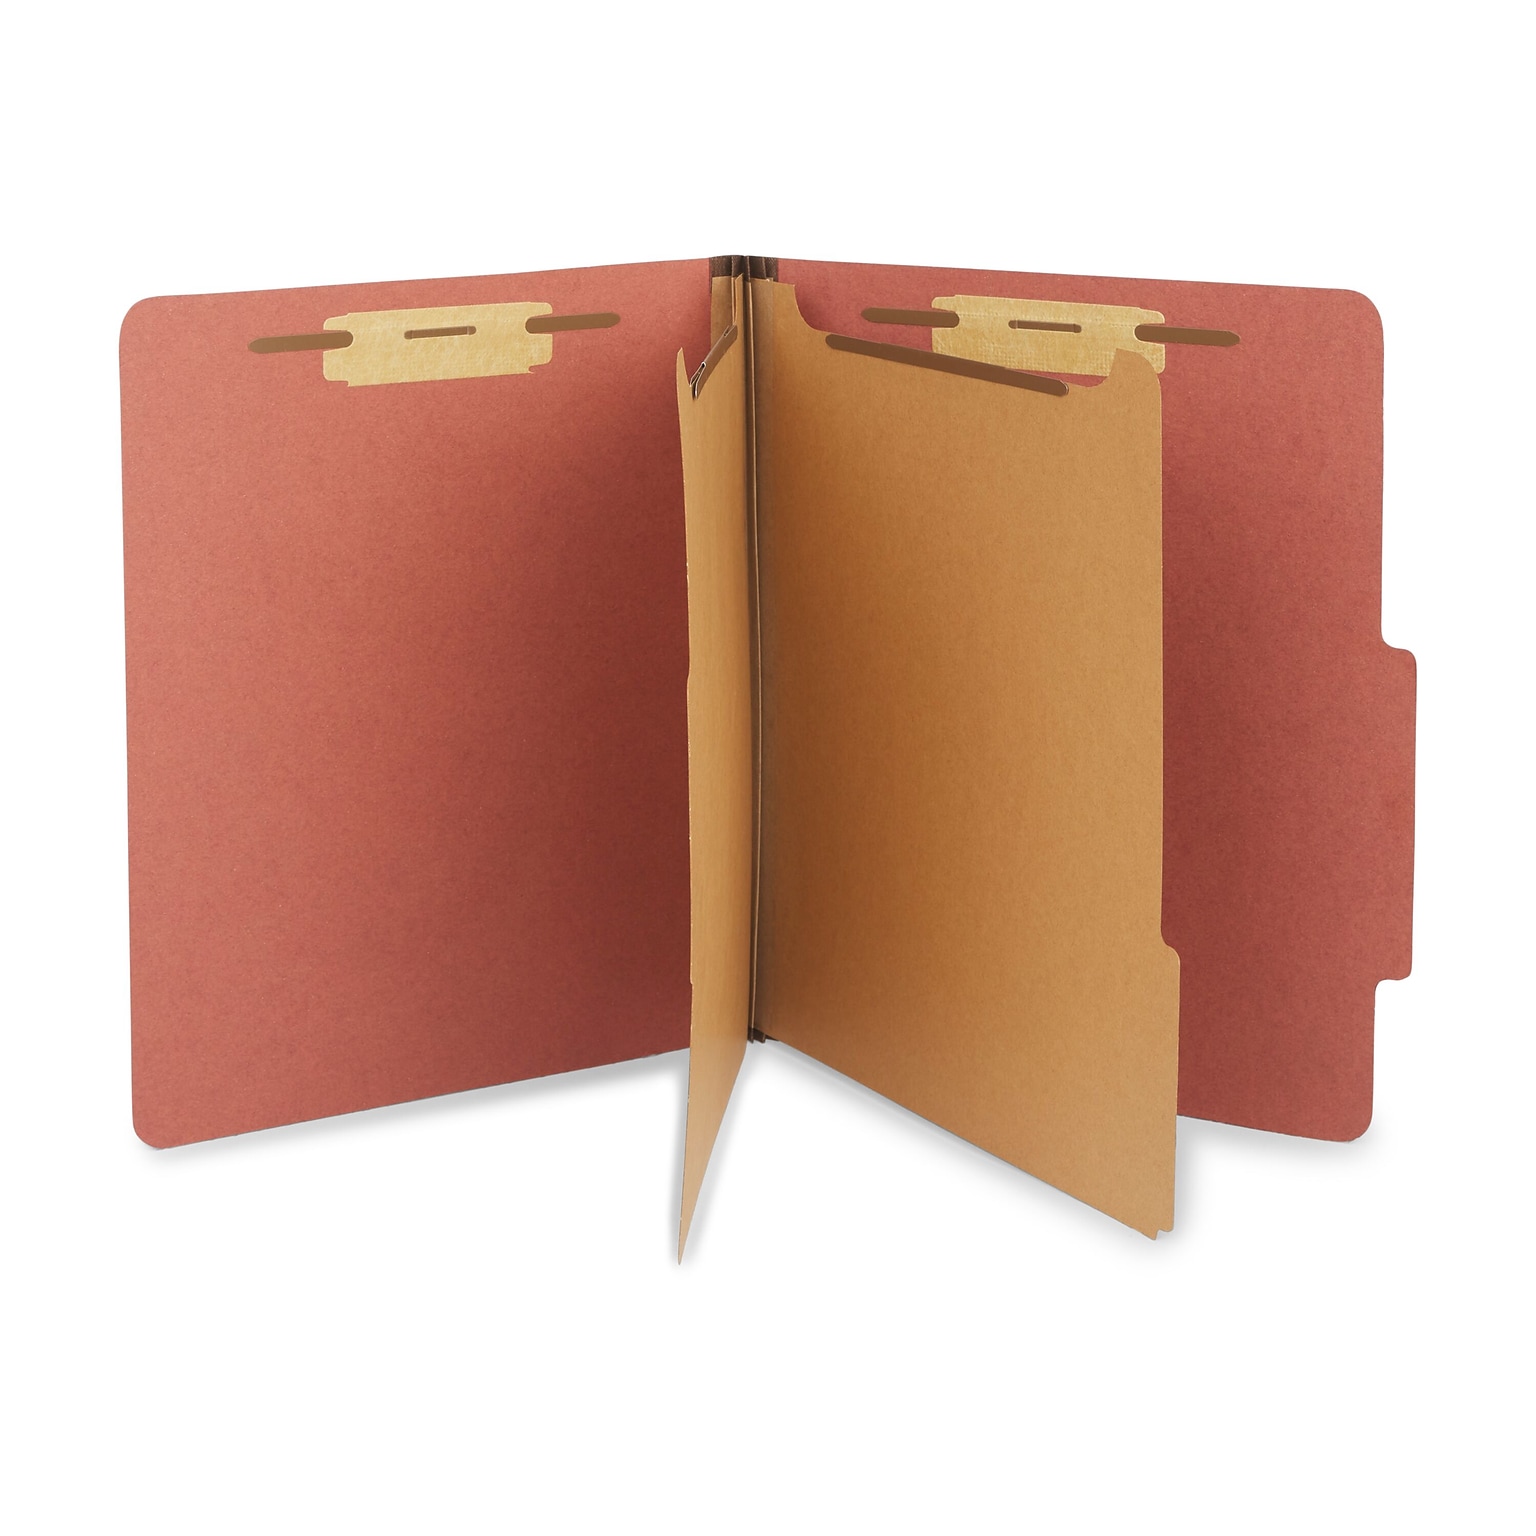 Staples® Recycled Pressboard Classification Folder, 2-Dividers, 2 1/2 Expansion, Letter Size, Brick Red, 20/Box (ST614615-CC)